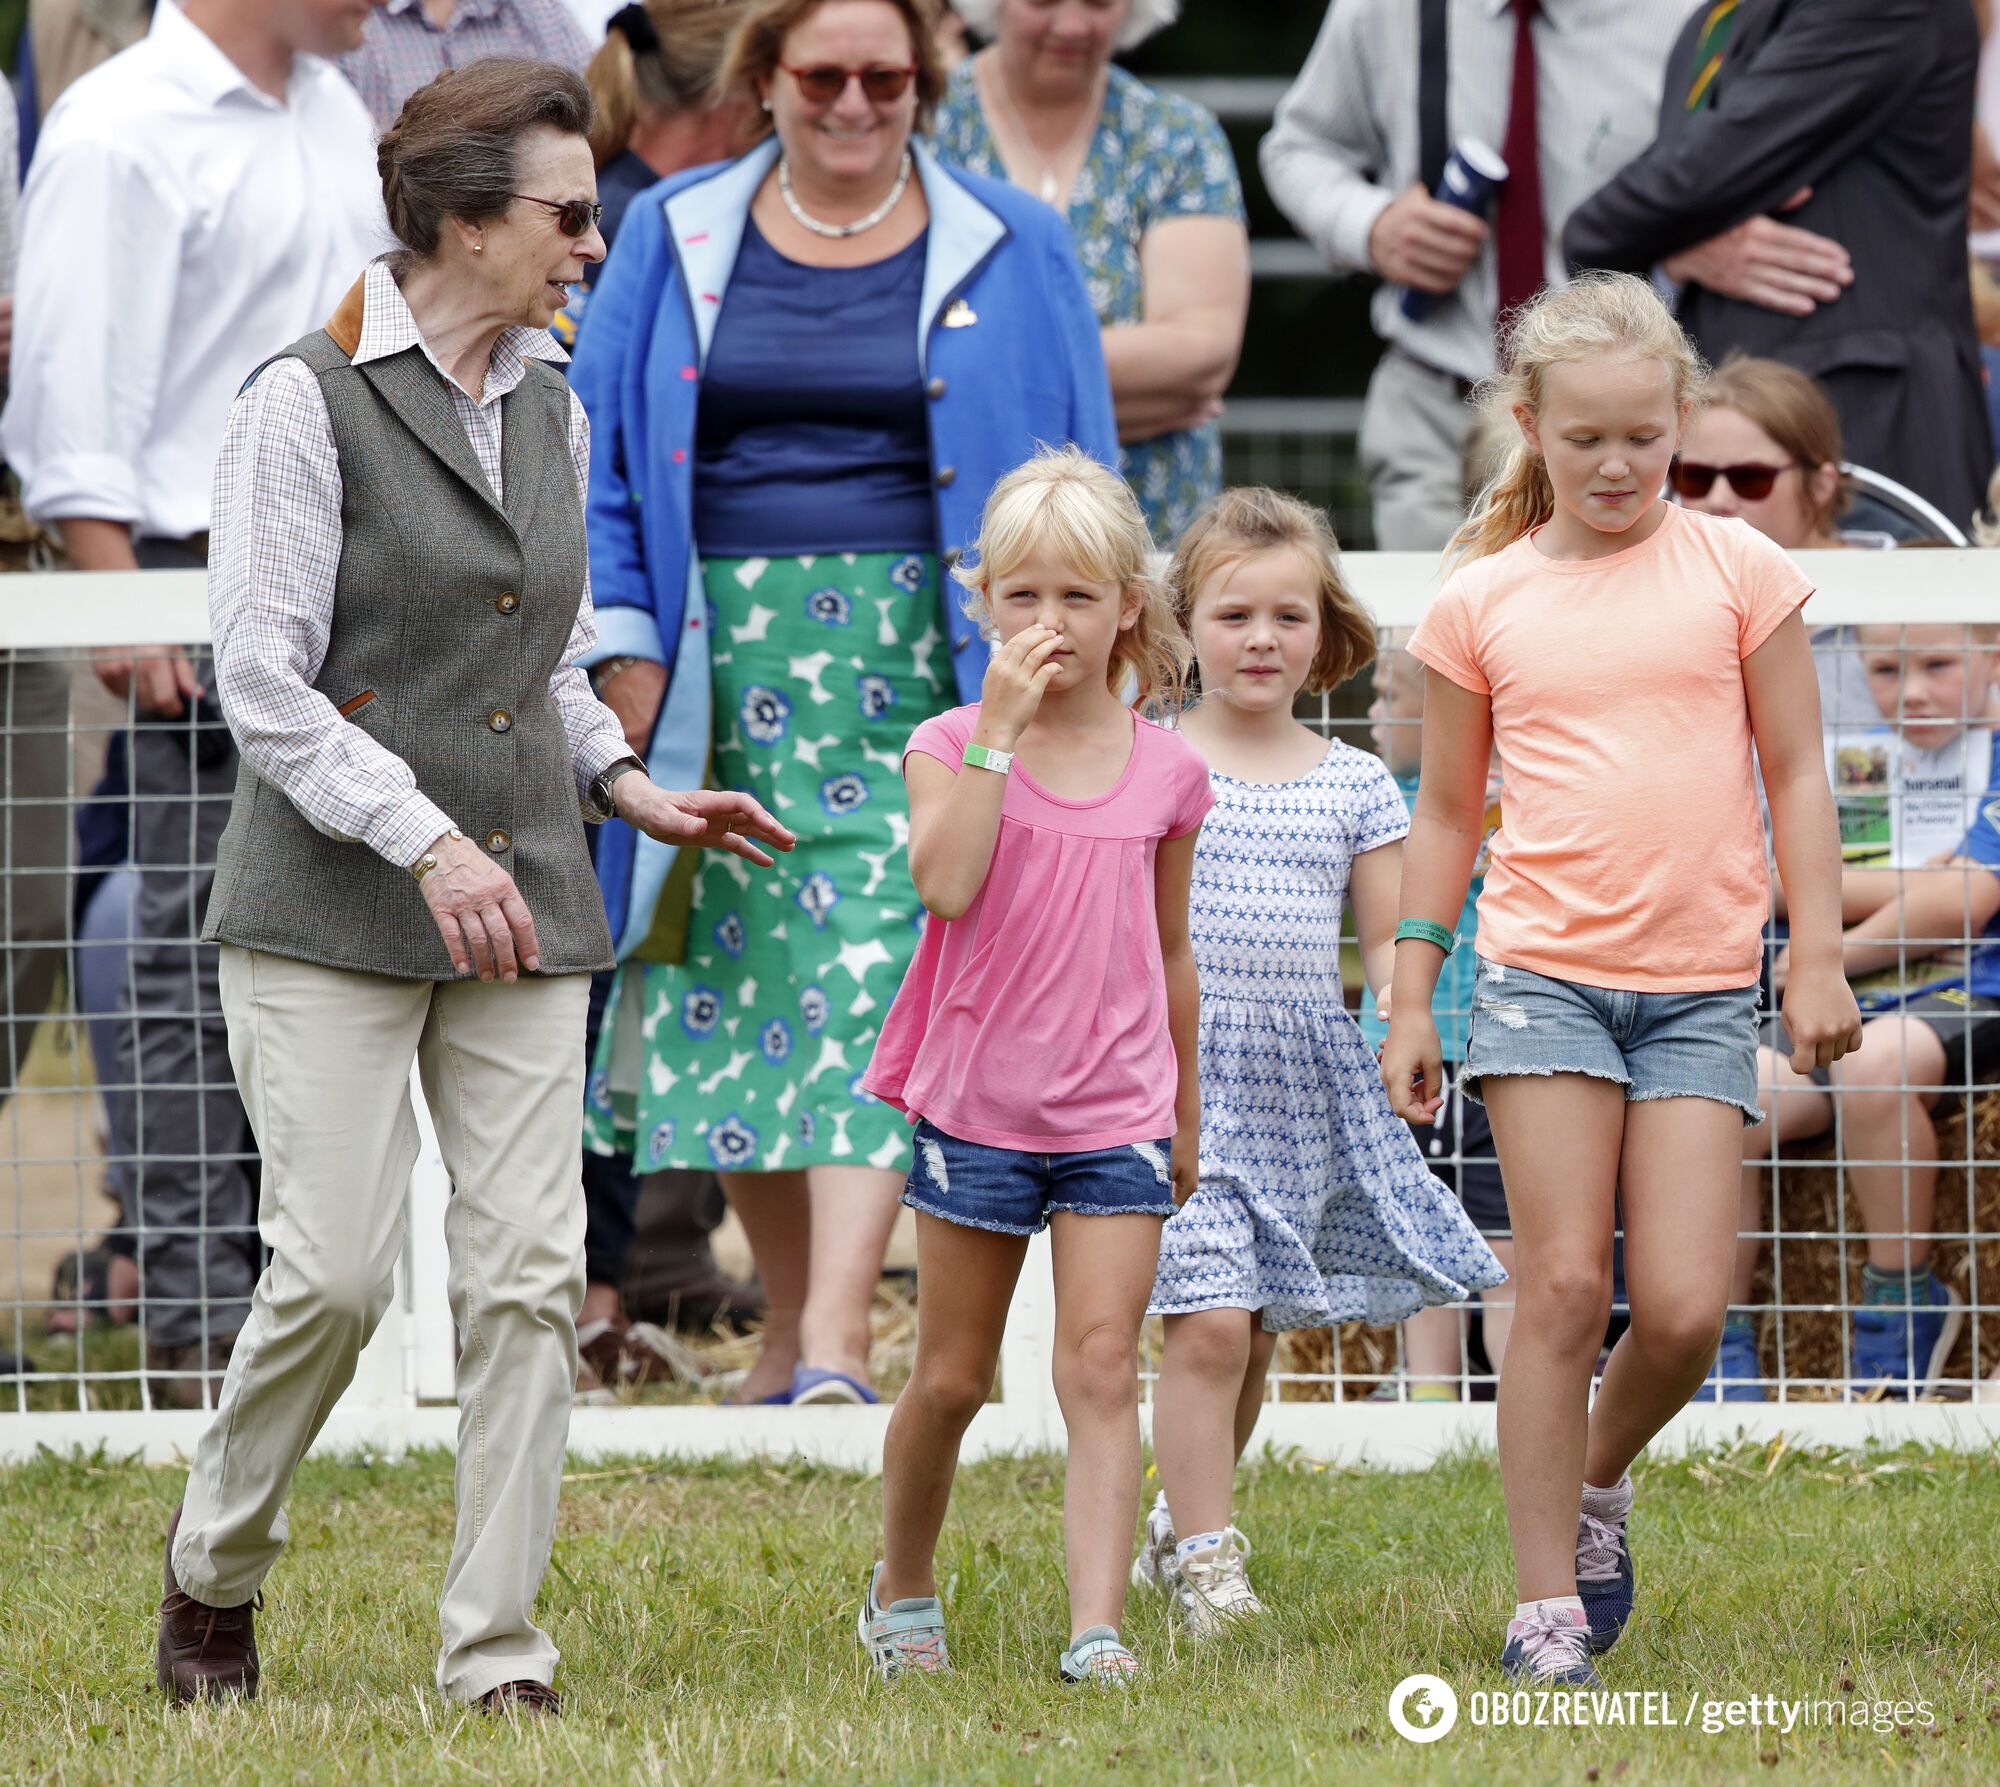 Princess Anne, Queen Margrethe and others. 7 cute photos that show the incredible love between grandmothers and grandchildren